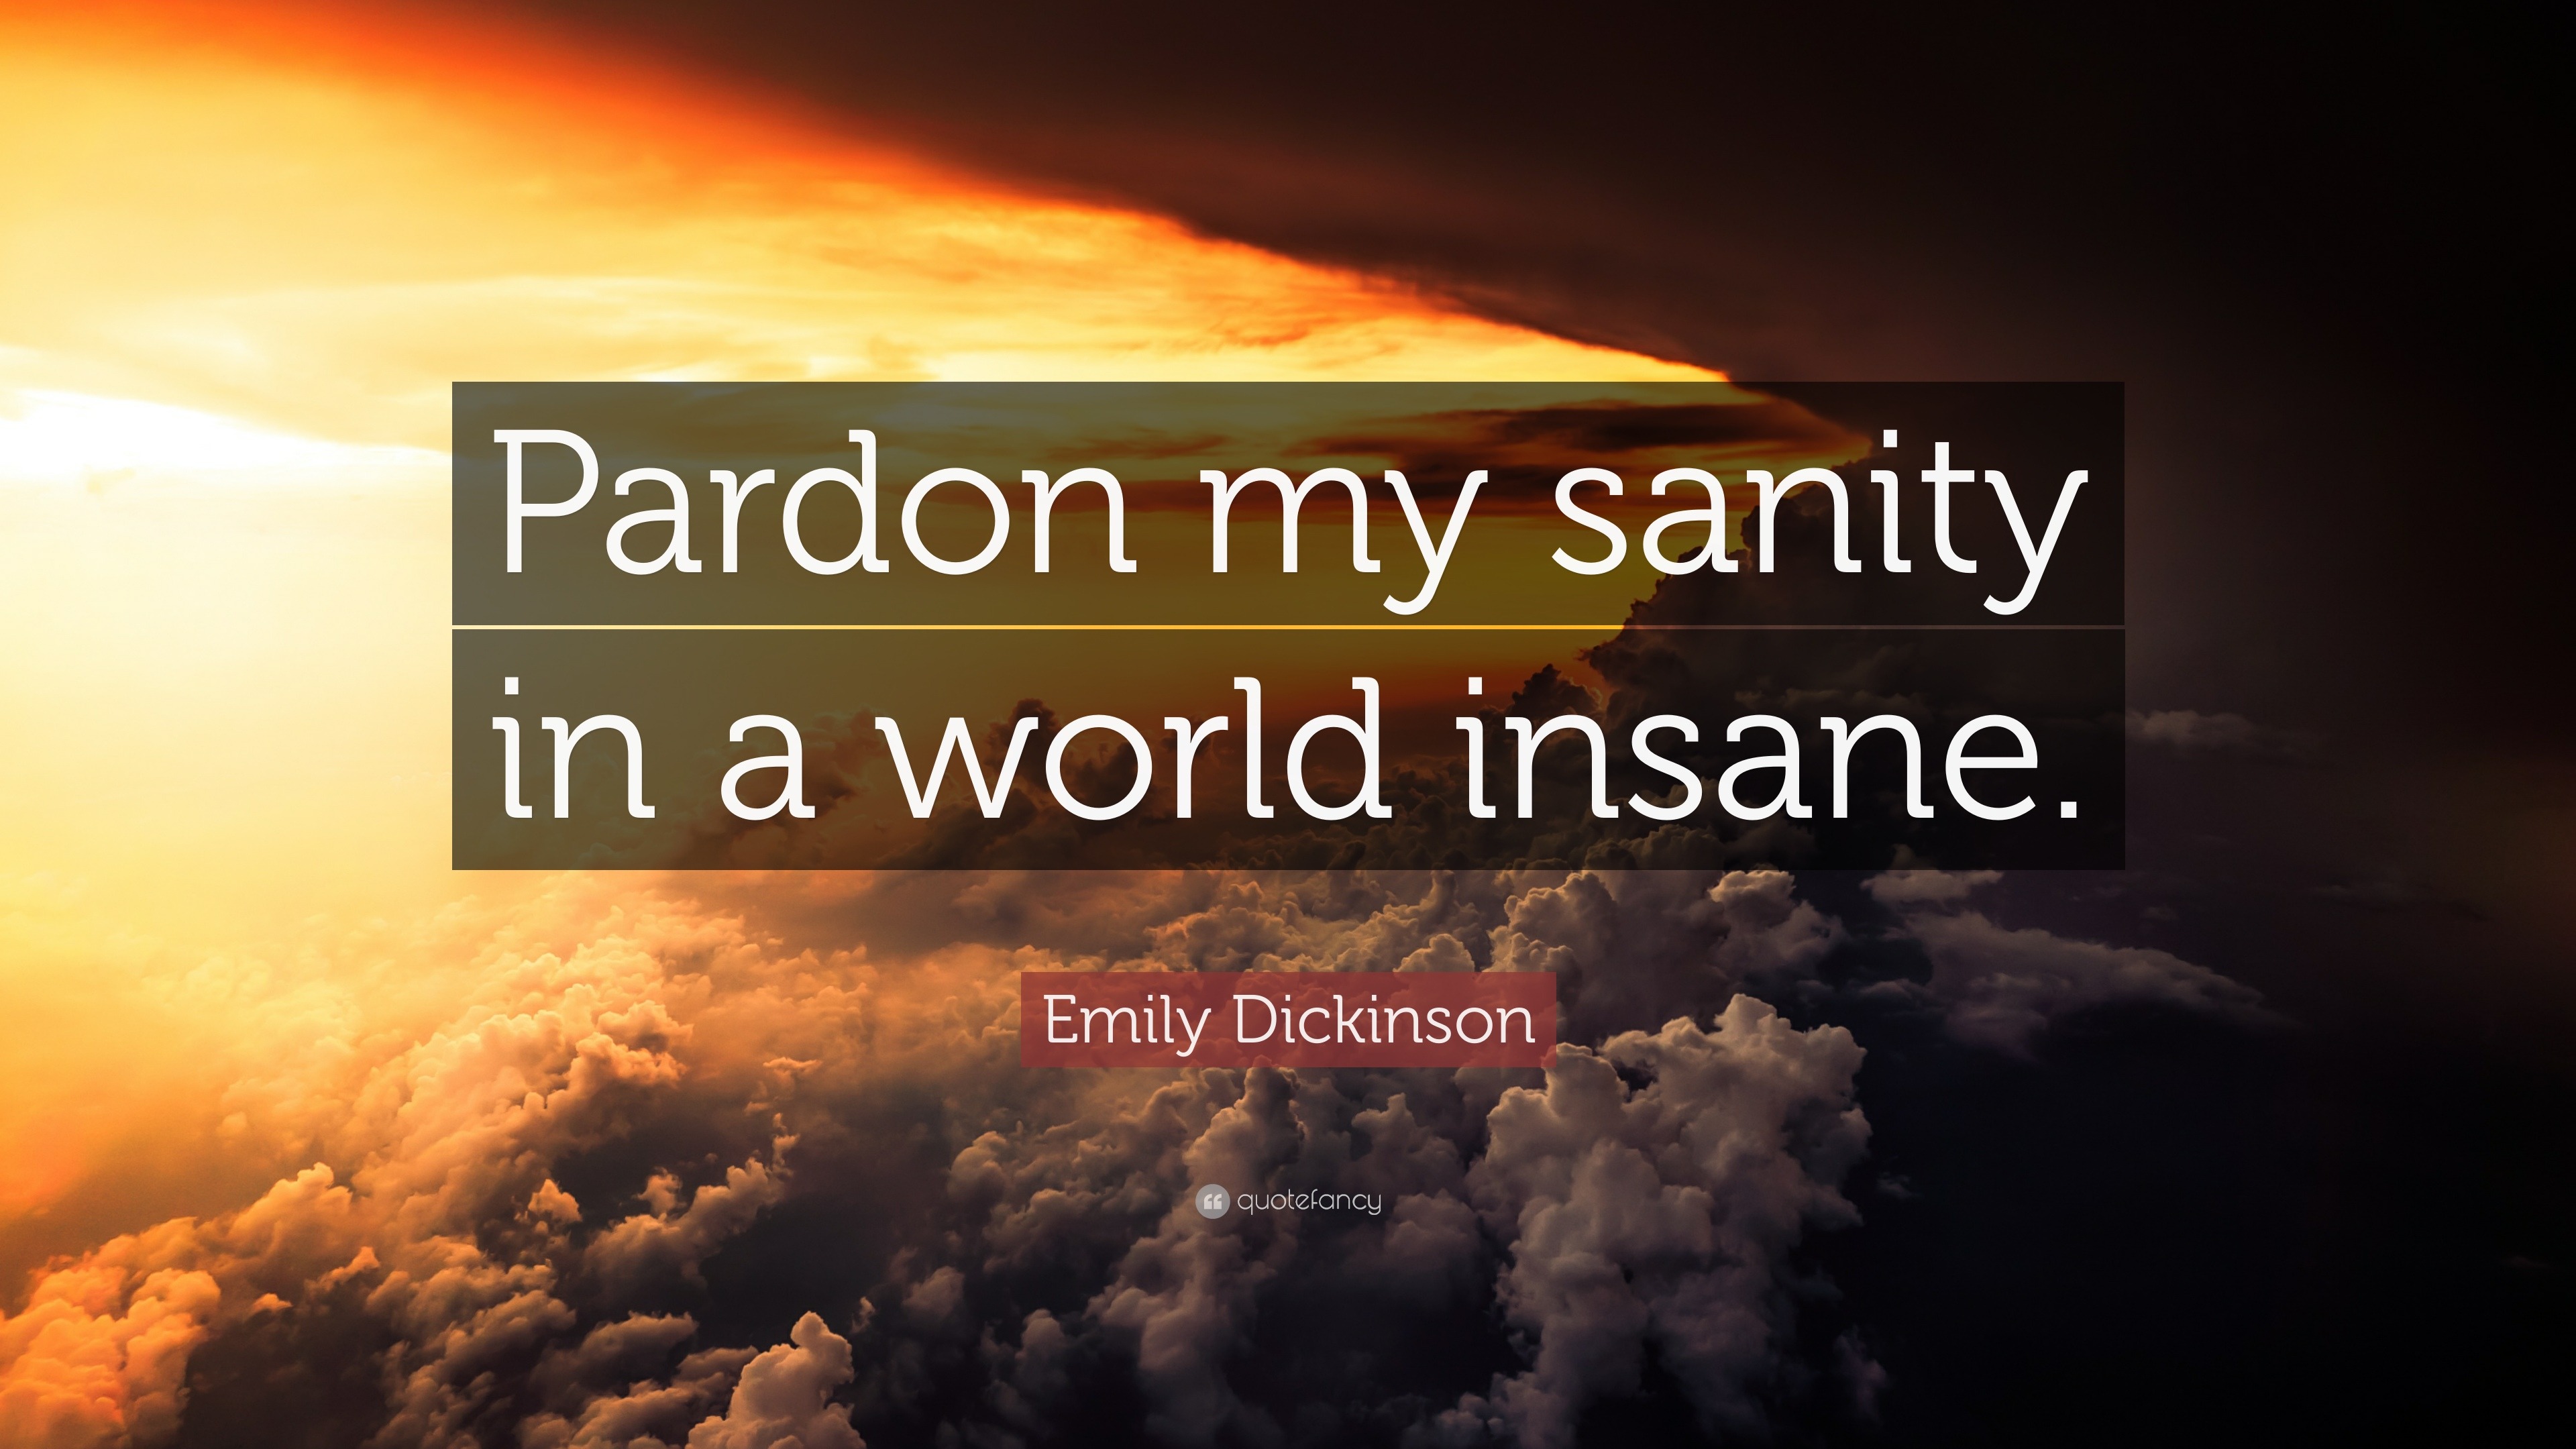 Emily Dickinson Quote: “Pardon my sanity in a world insane.” (23